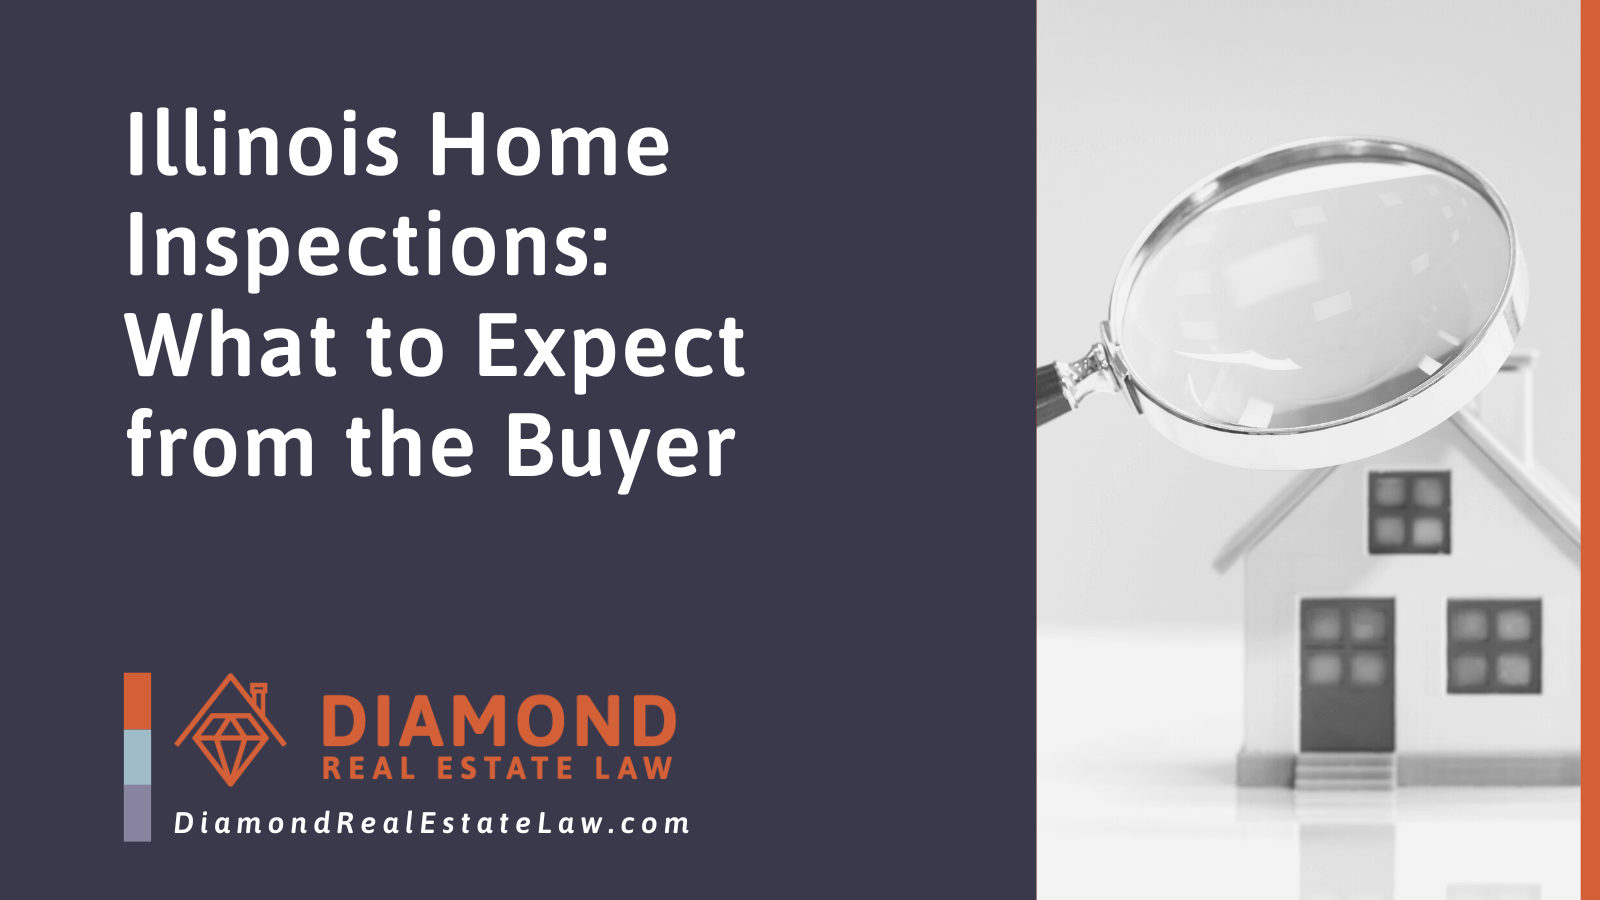 Illinois Home Inspections: What to Expect from the Buyer - Diamond Real Estate Law | McHenry, IL Residential Real Estate Lawyer